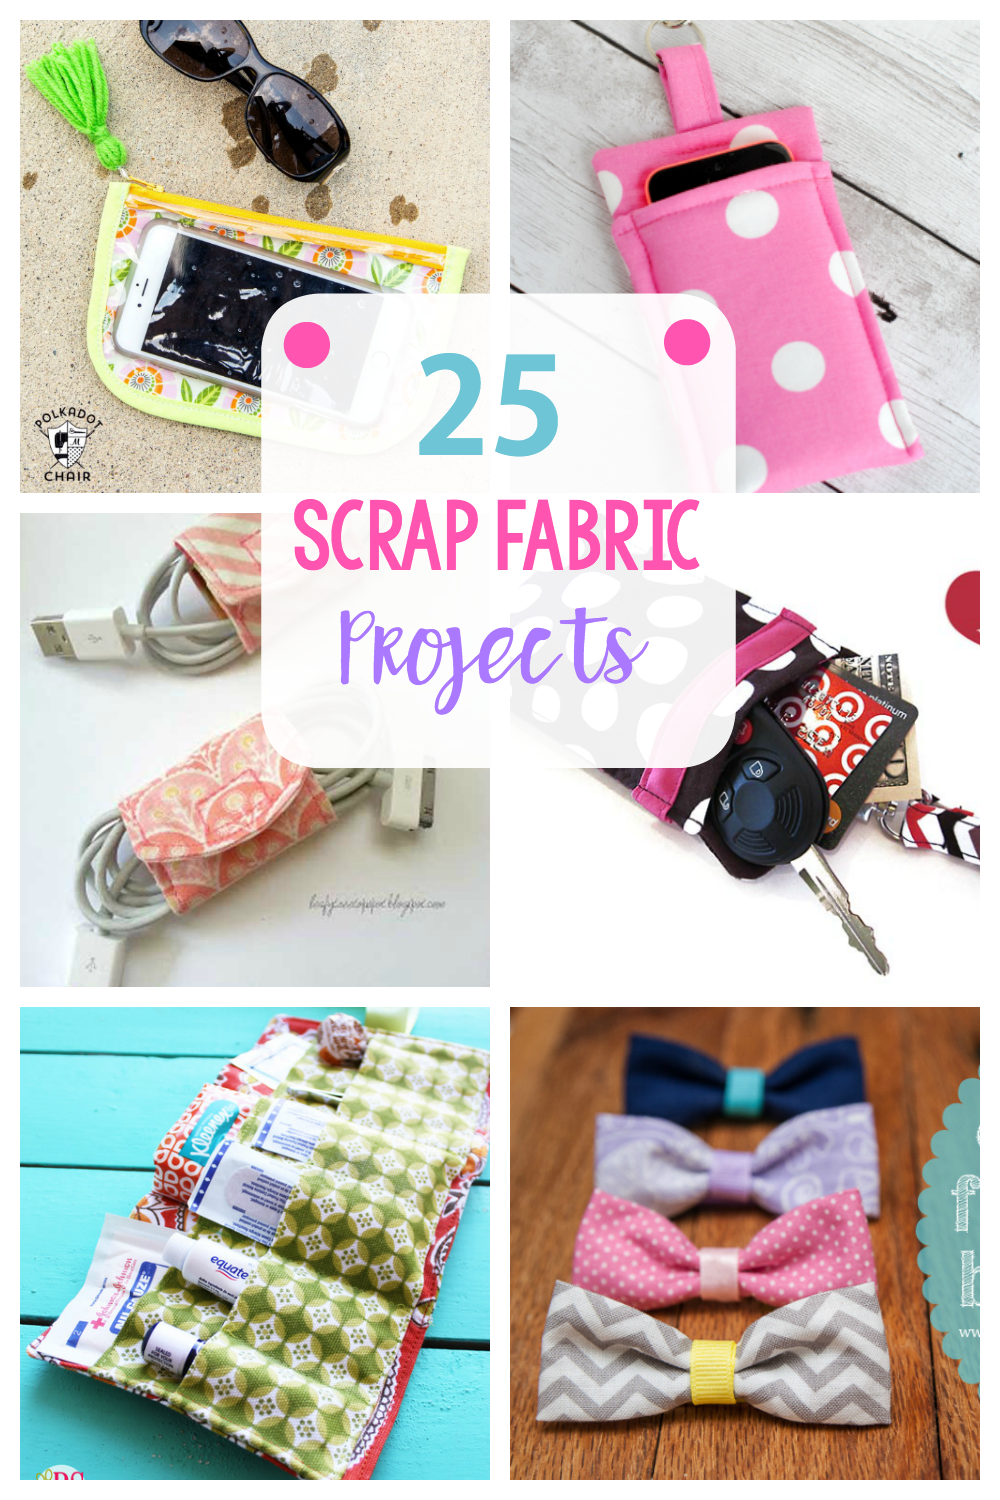 25 Fun Ways to Use Your Fabric Scraps-These scrap fabric projects are super easy sewing ideas that will help you use up all those little pieces of leftover fabric. #sew #sewing #pattern #easysewing